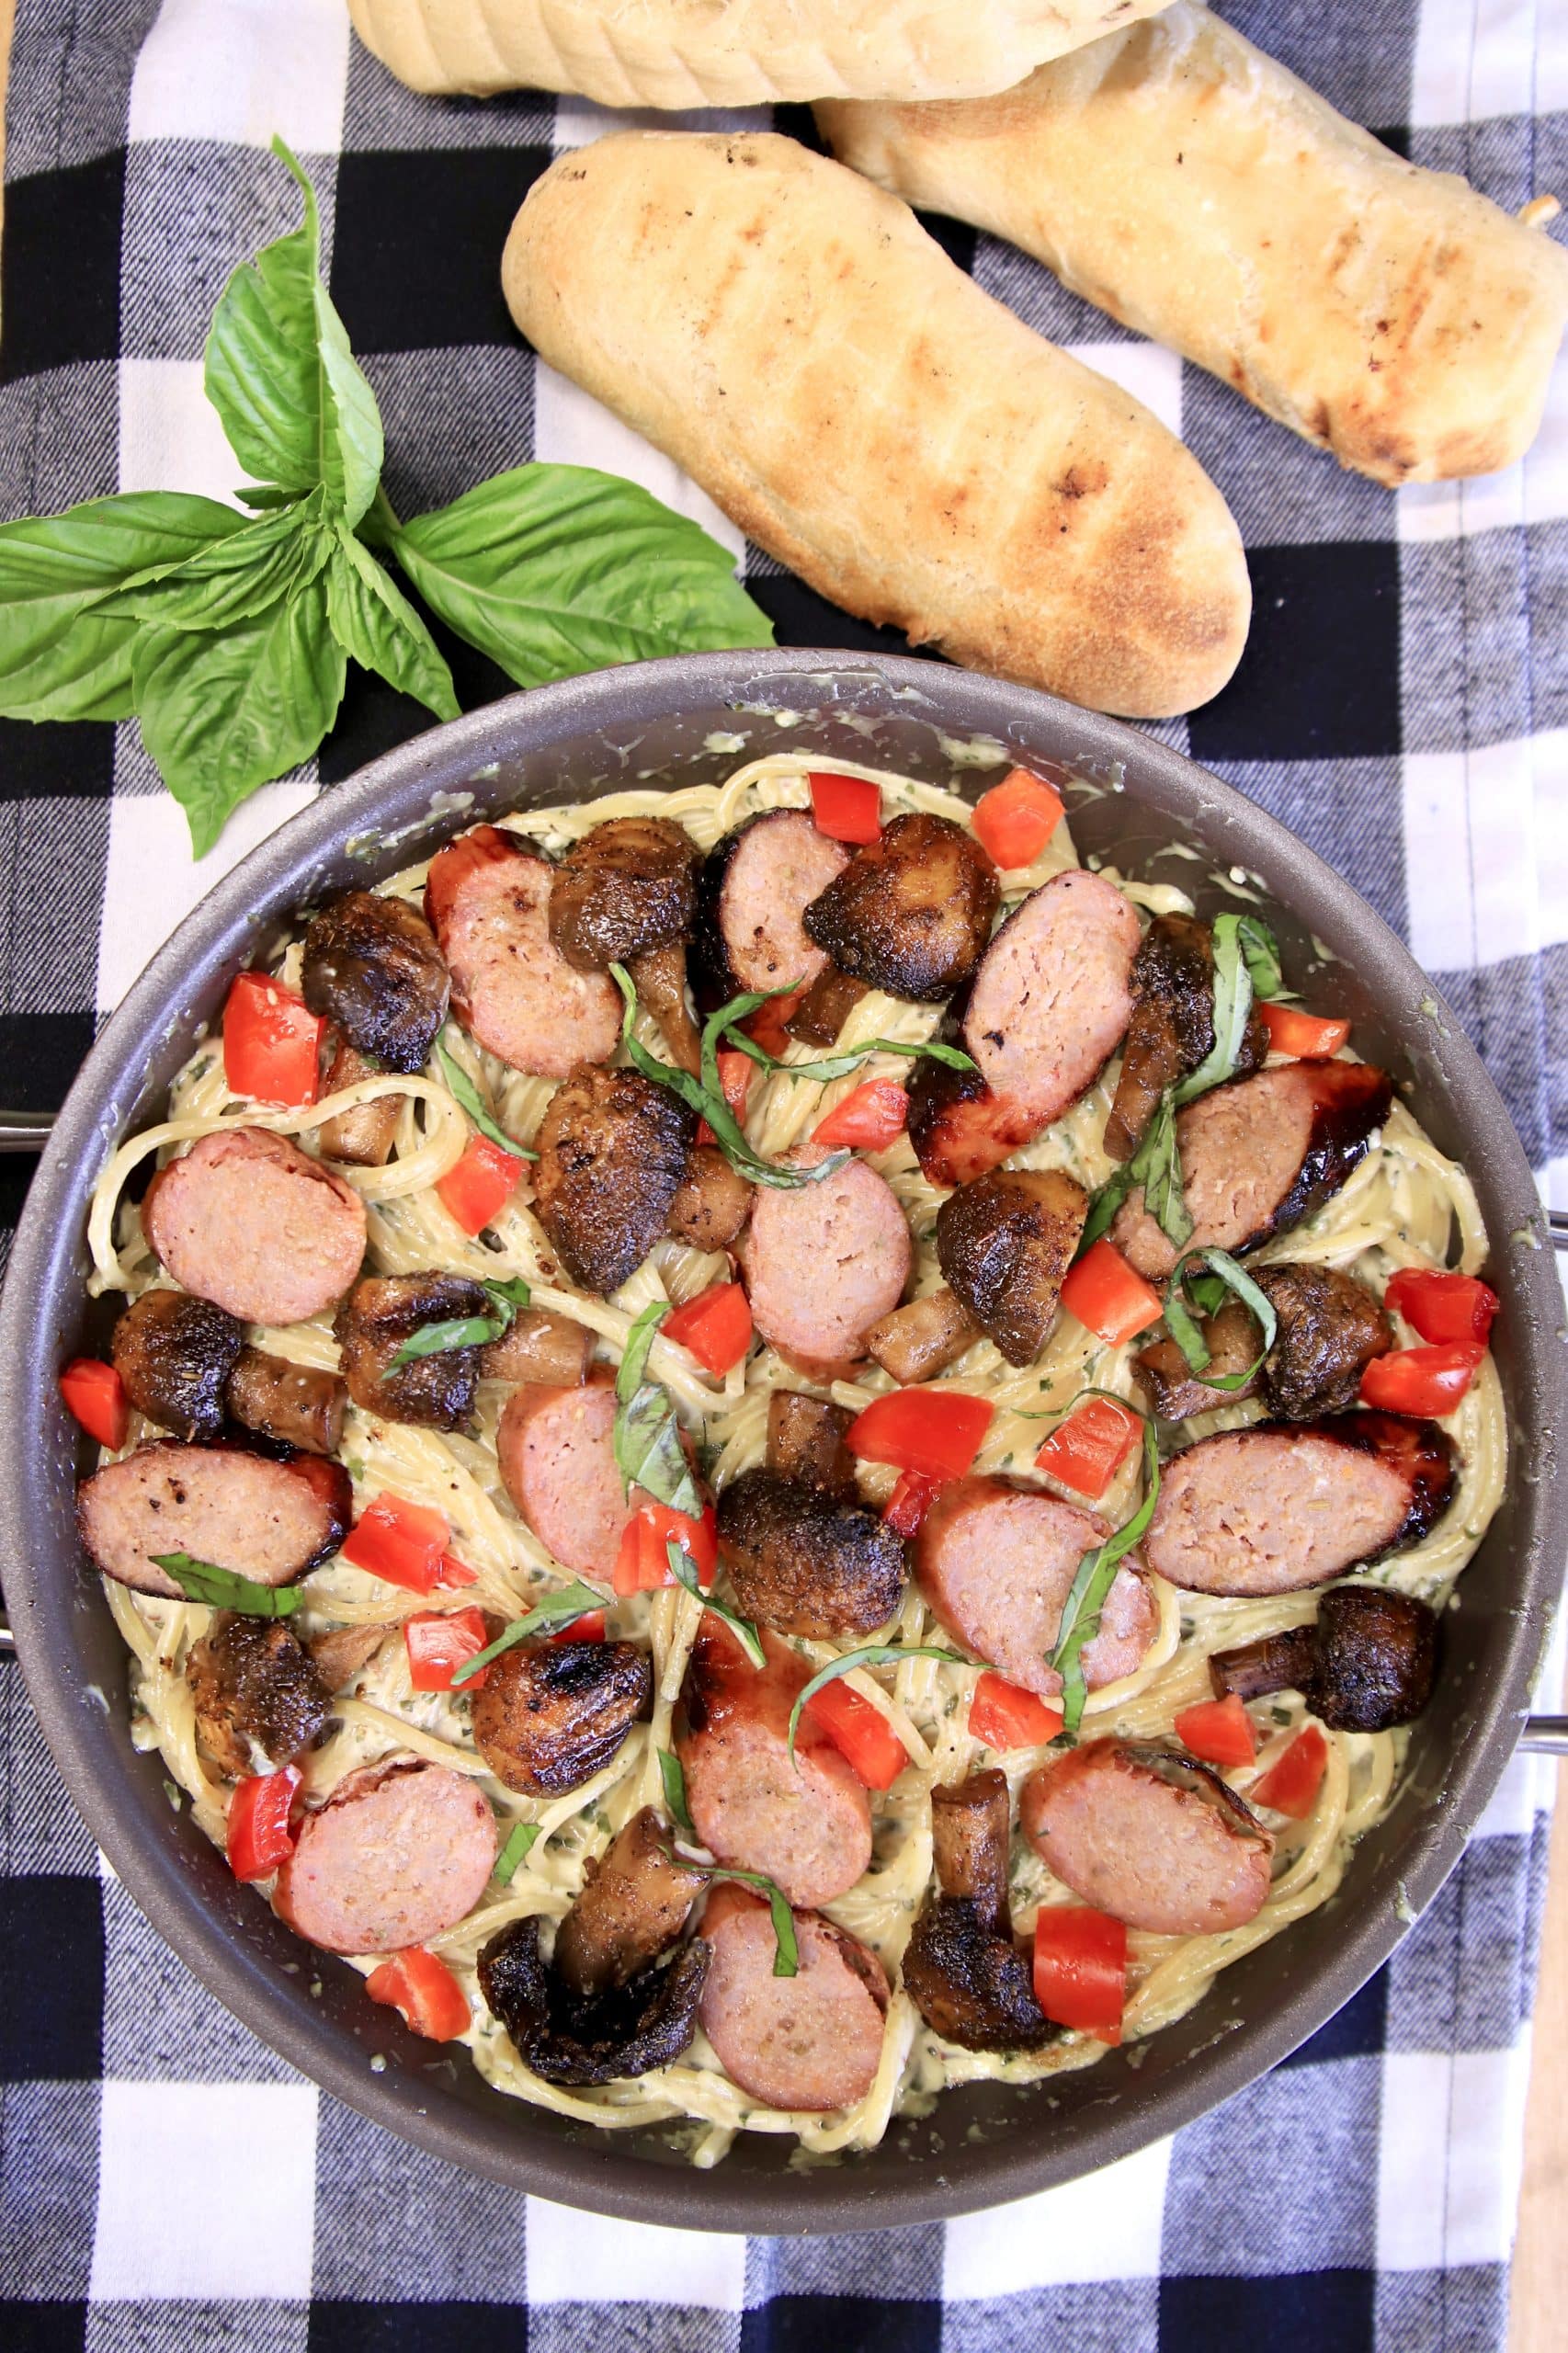 Pan of pasta with sliced sausage links, tomatoes, basil.